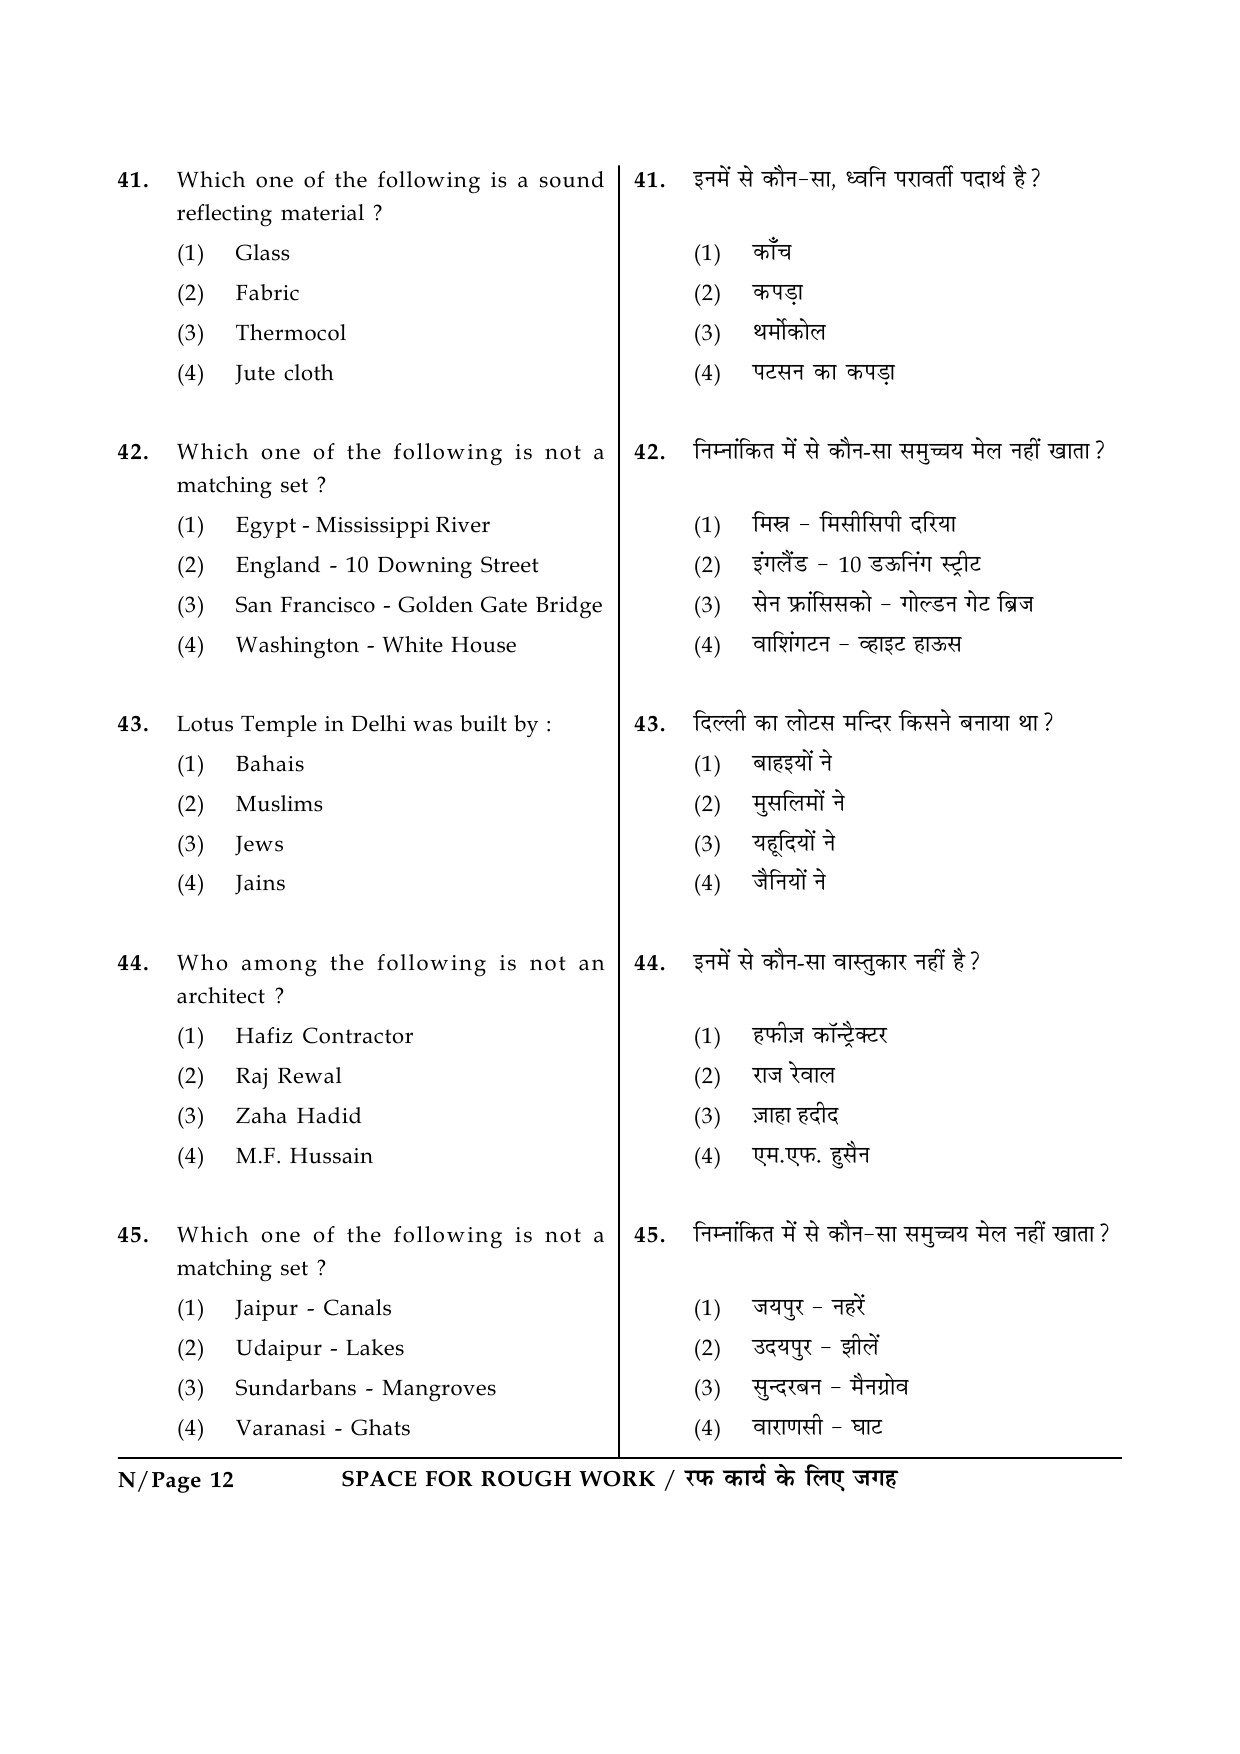 JEE Main Exam Question Paper 2015 Booklet N 12